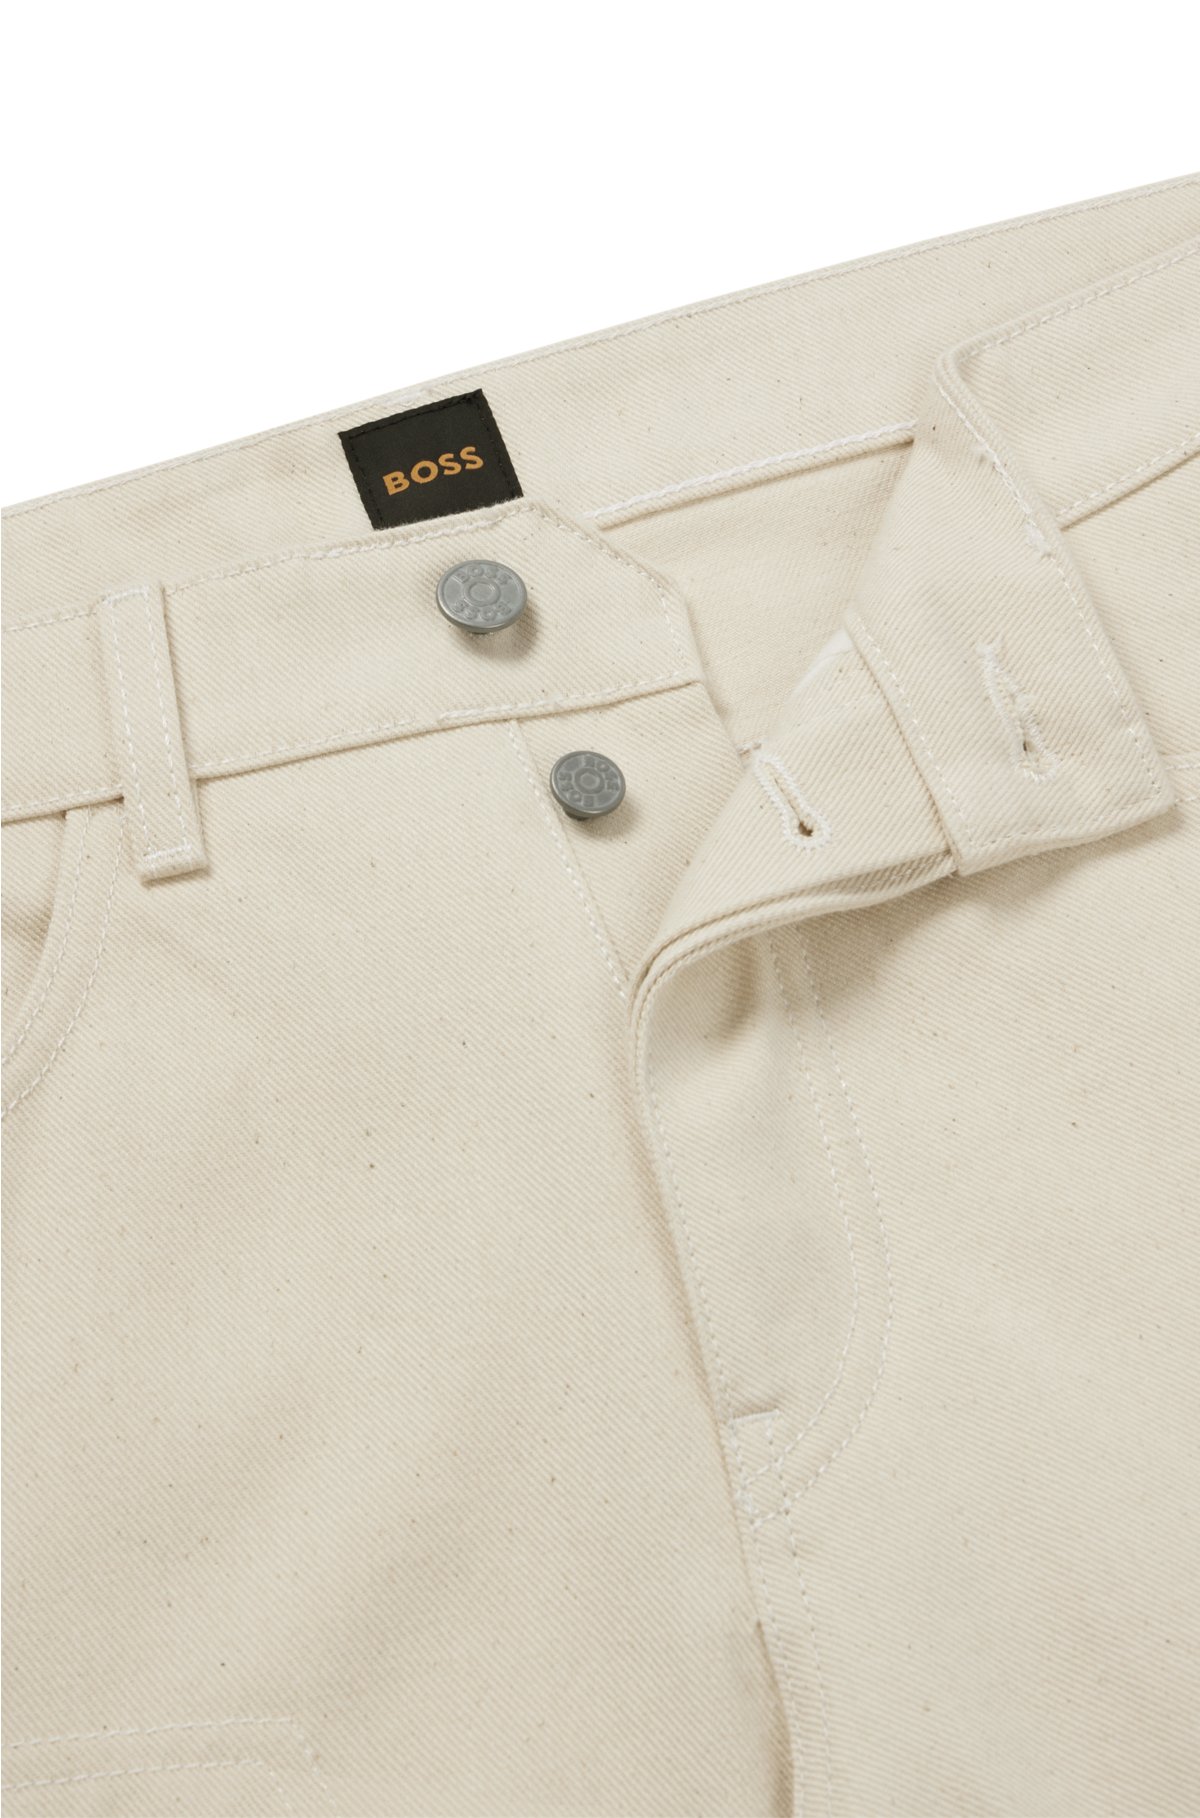 BOSS - Relaxed-fit jeans in ecru signature trims